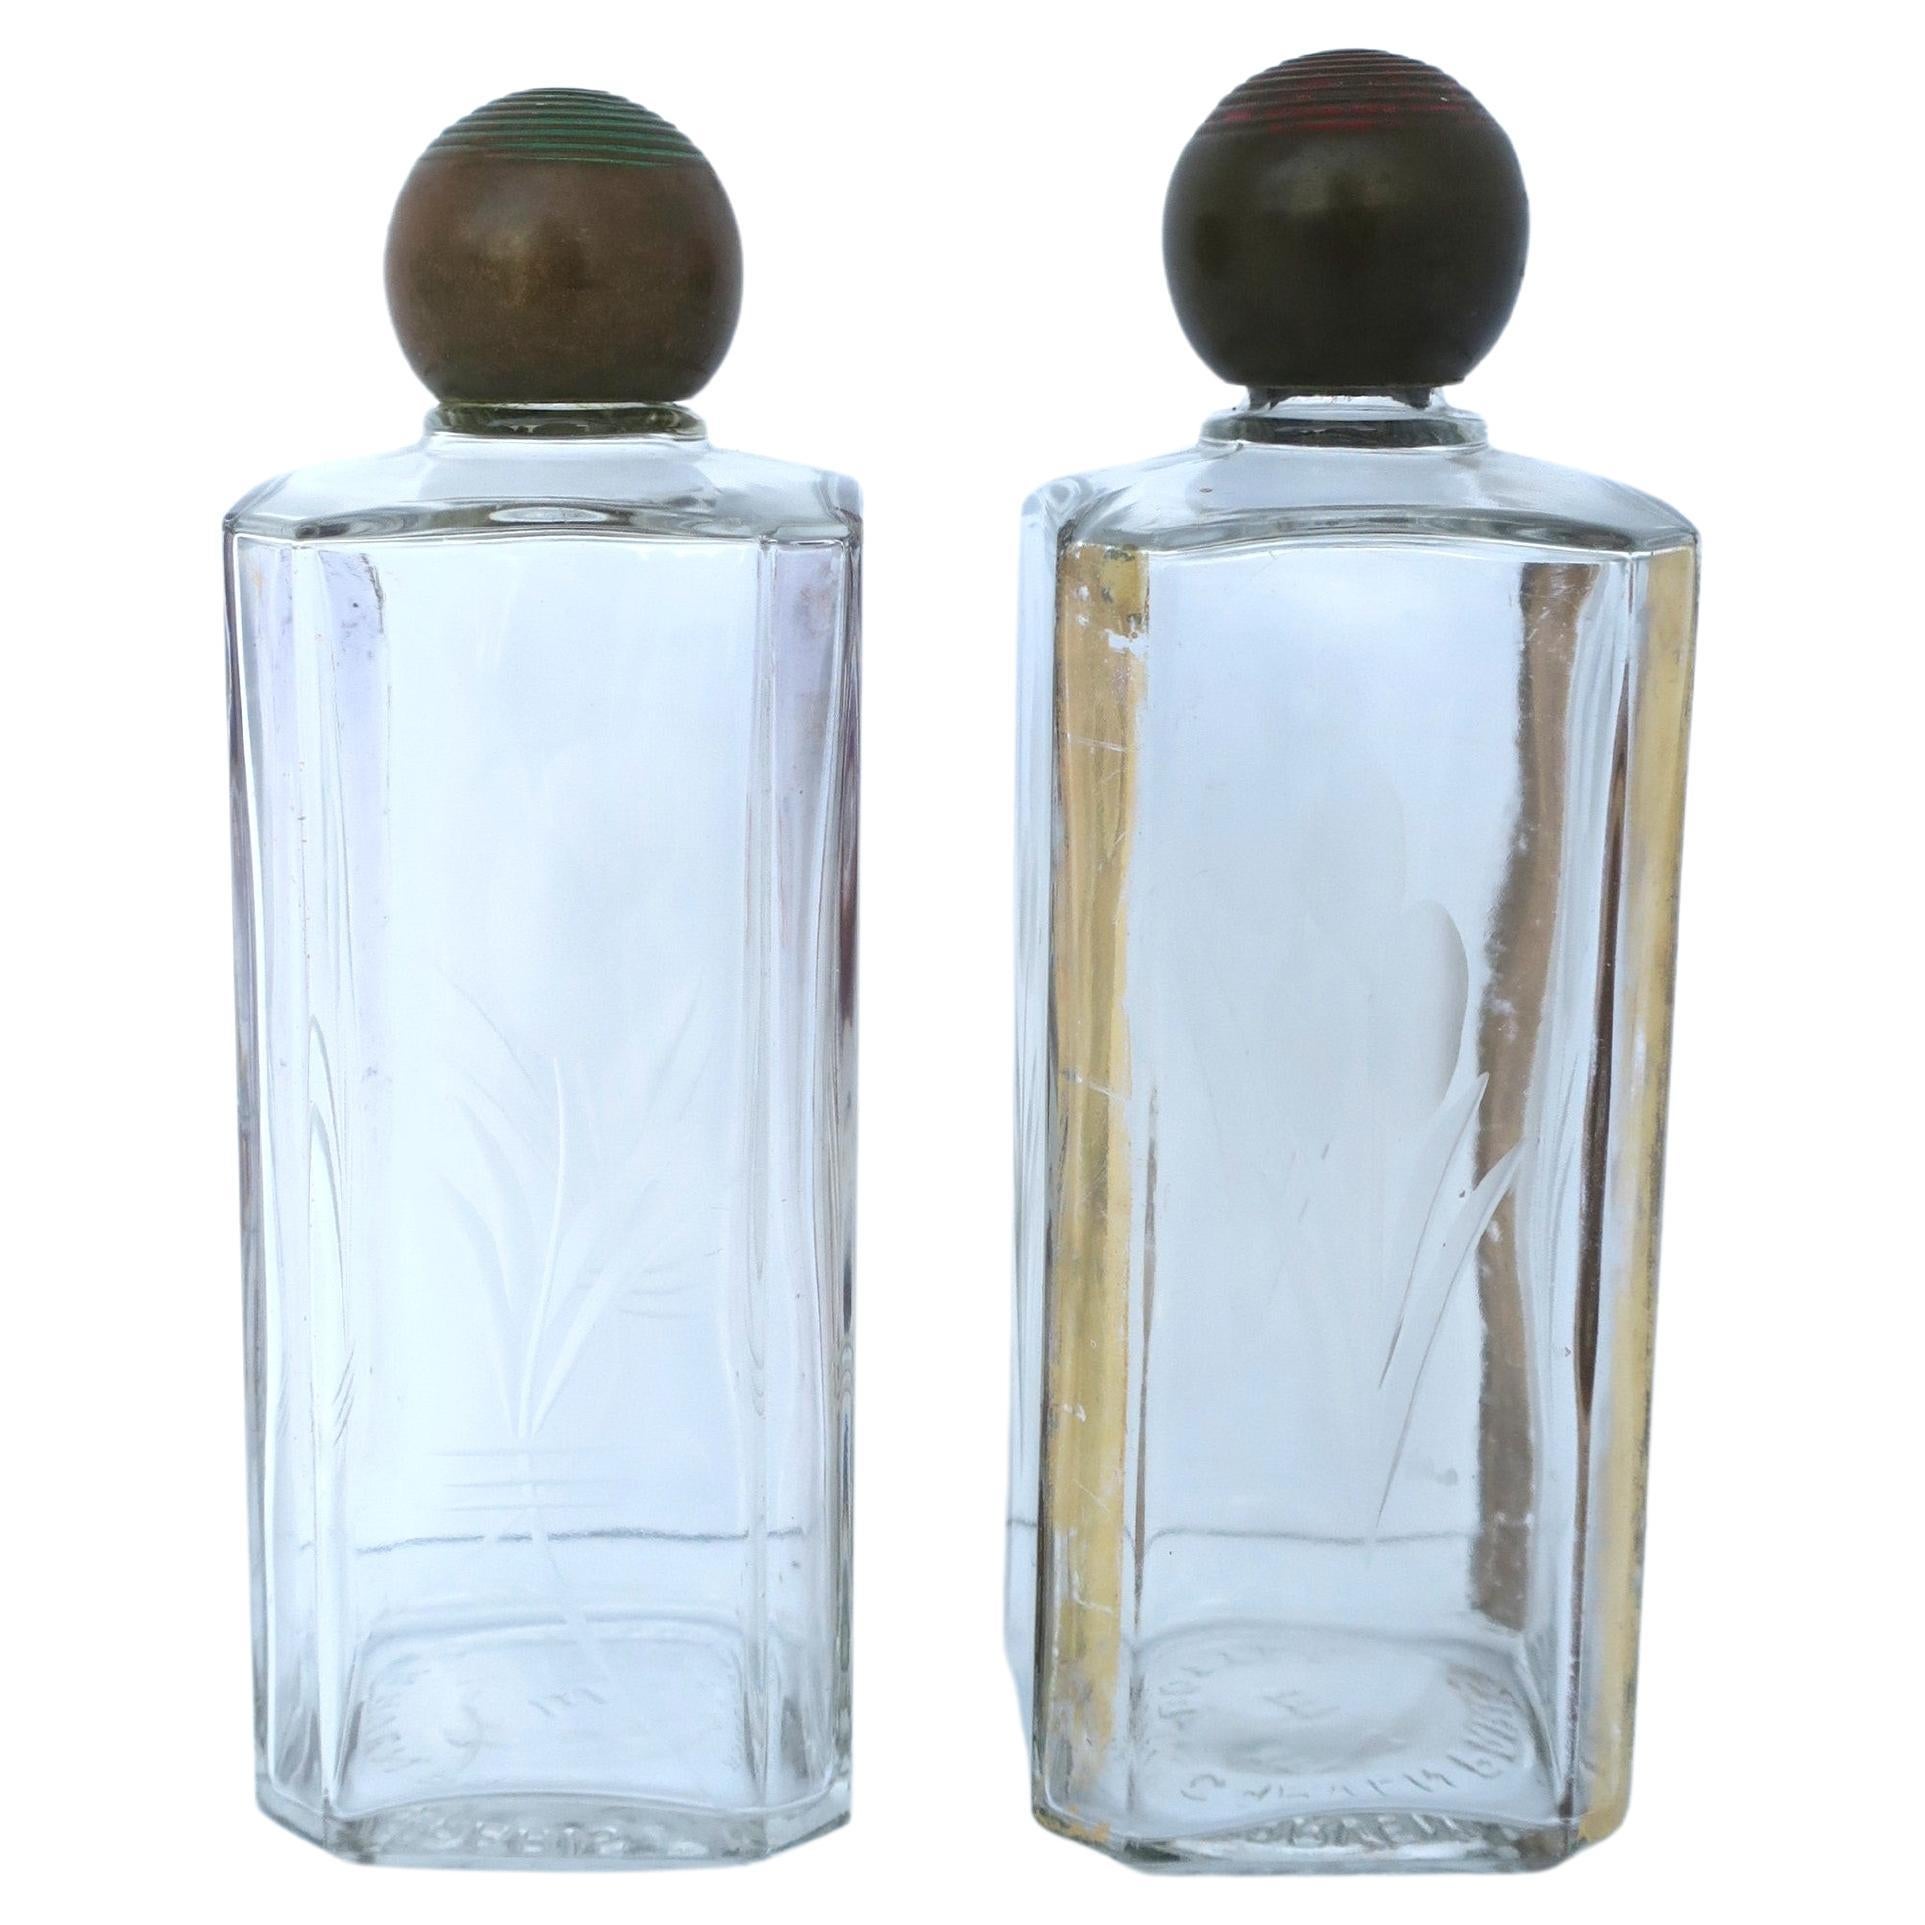 French Art Deco Glass Bottles from Paris, Pair